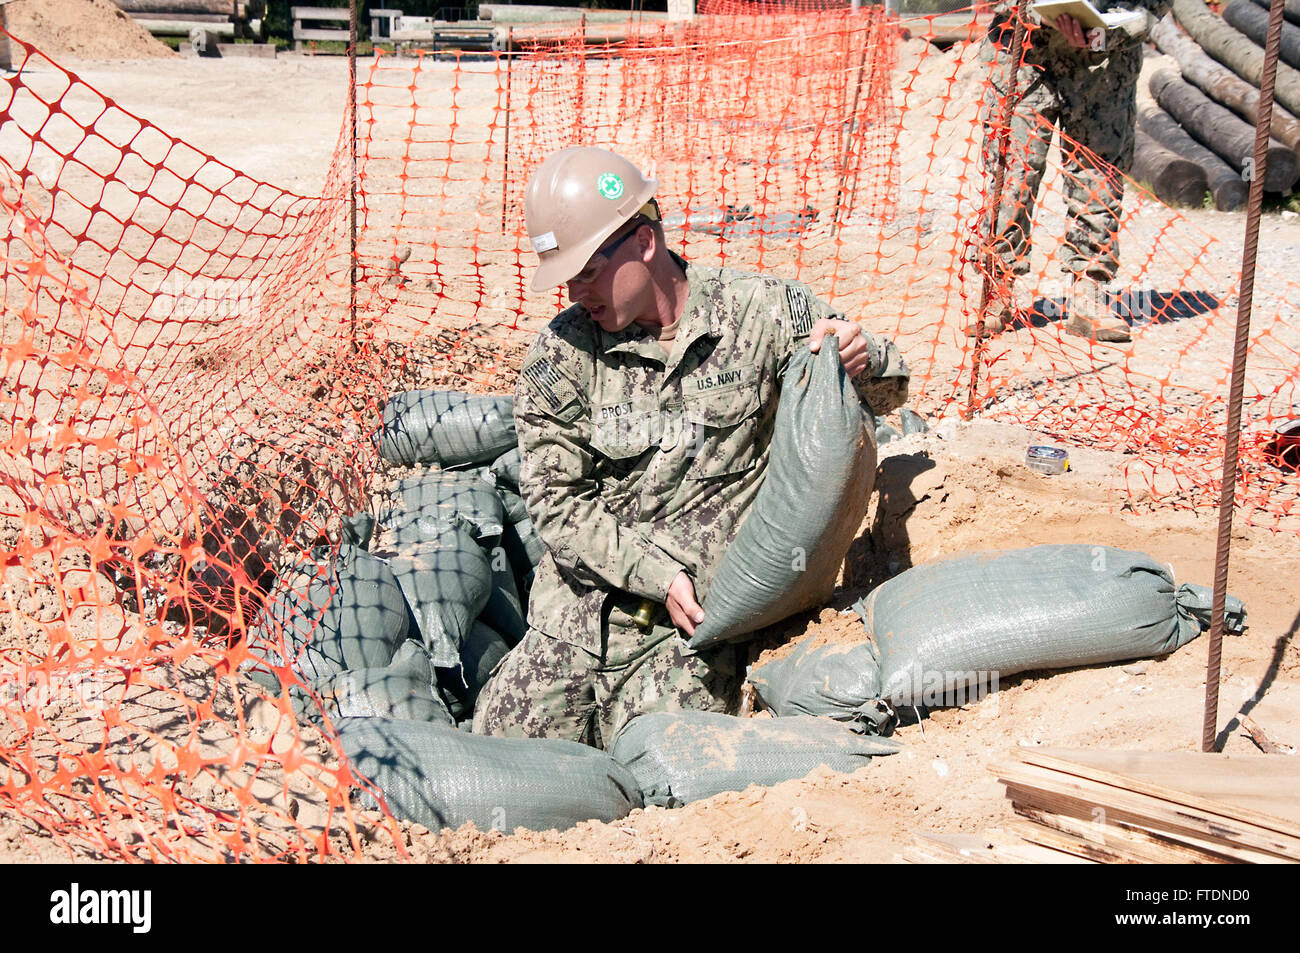 160316-N-VJ282-002 ROTA, Spain (March 16, 2016) Builder Constructionman Cody Brost, assigned to Naval Mobile Construction Battalion 133, fills a hole with sandbags during the construction of the Shipboard Electronic Systems Evaluation Facility (SESEF) at Naval Station Rota March 16, 2016. The SESEF will provide test and evaluation services to the Navy, Coast Guard, Military Sealift Command as well as allied foreign navies. (U.S. Navy photo by Mass Communication Specialist 1st Class Brian Dietrick/Released) Stock Photo